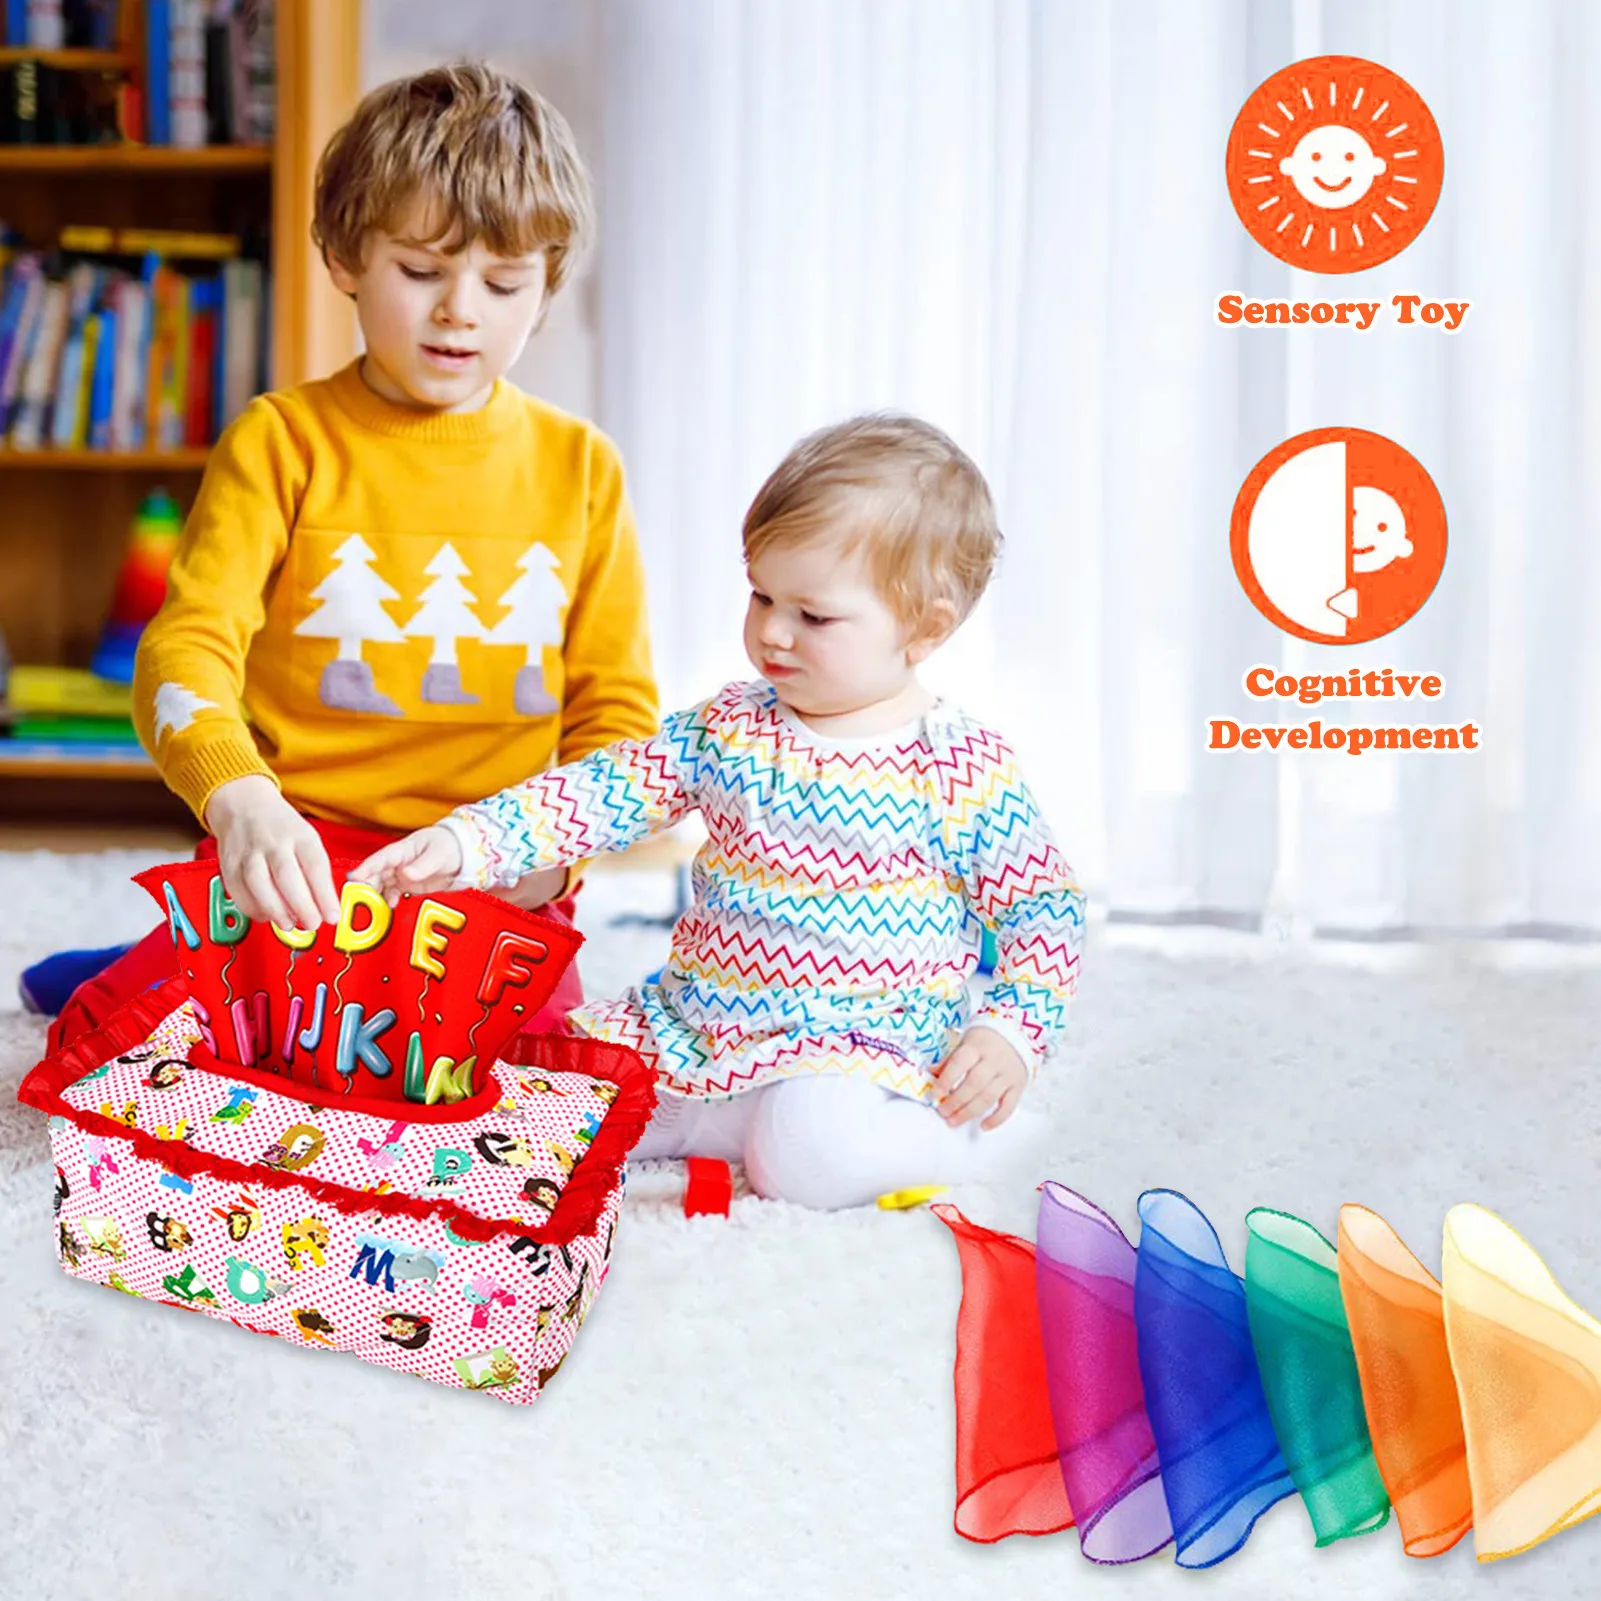 

Pull Along Baby Tissue Box Toy Colorful Scarves Montessori Toys For Babies 6-12 Months Educational Pull Tissues Activities Gift